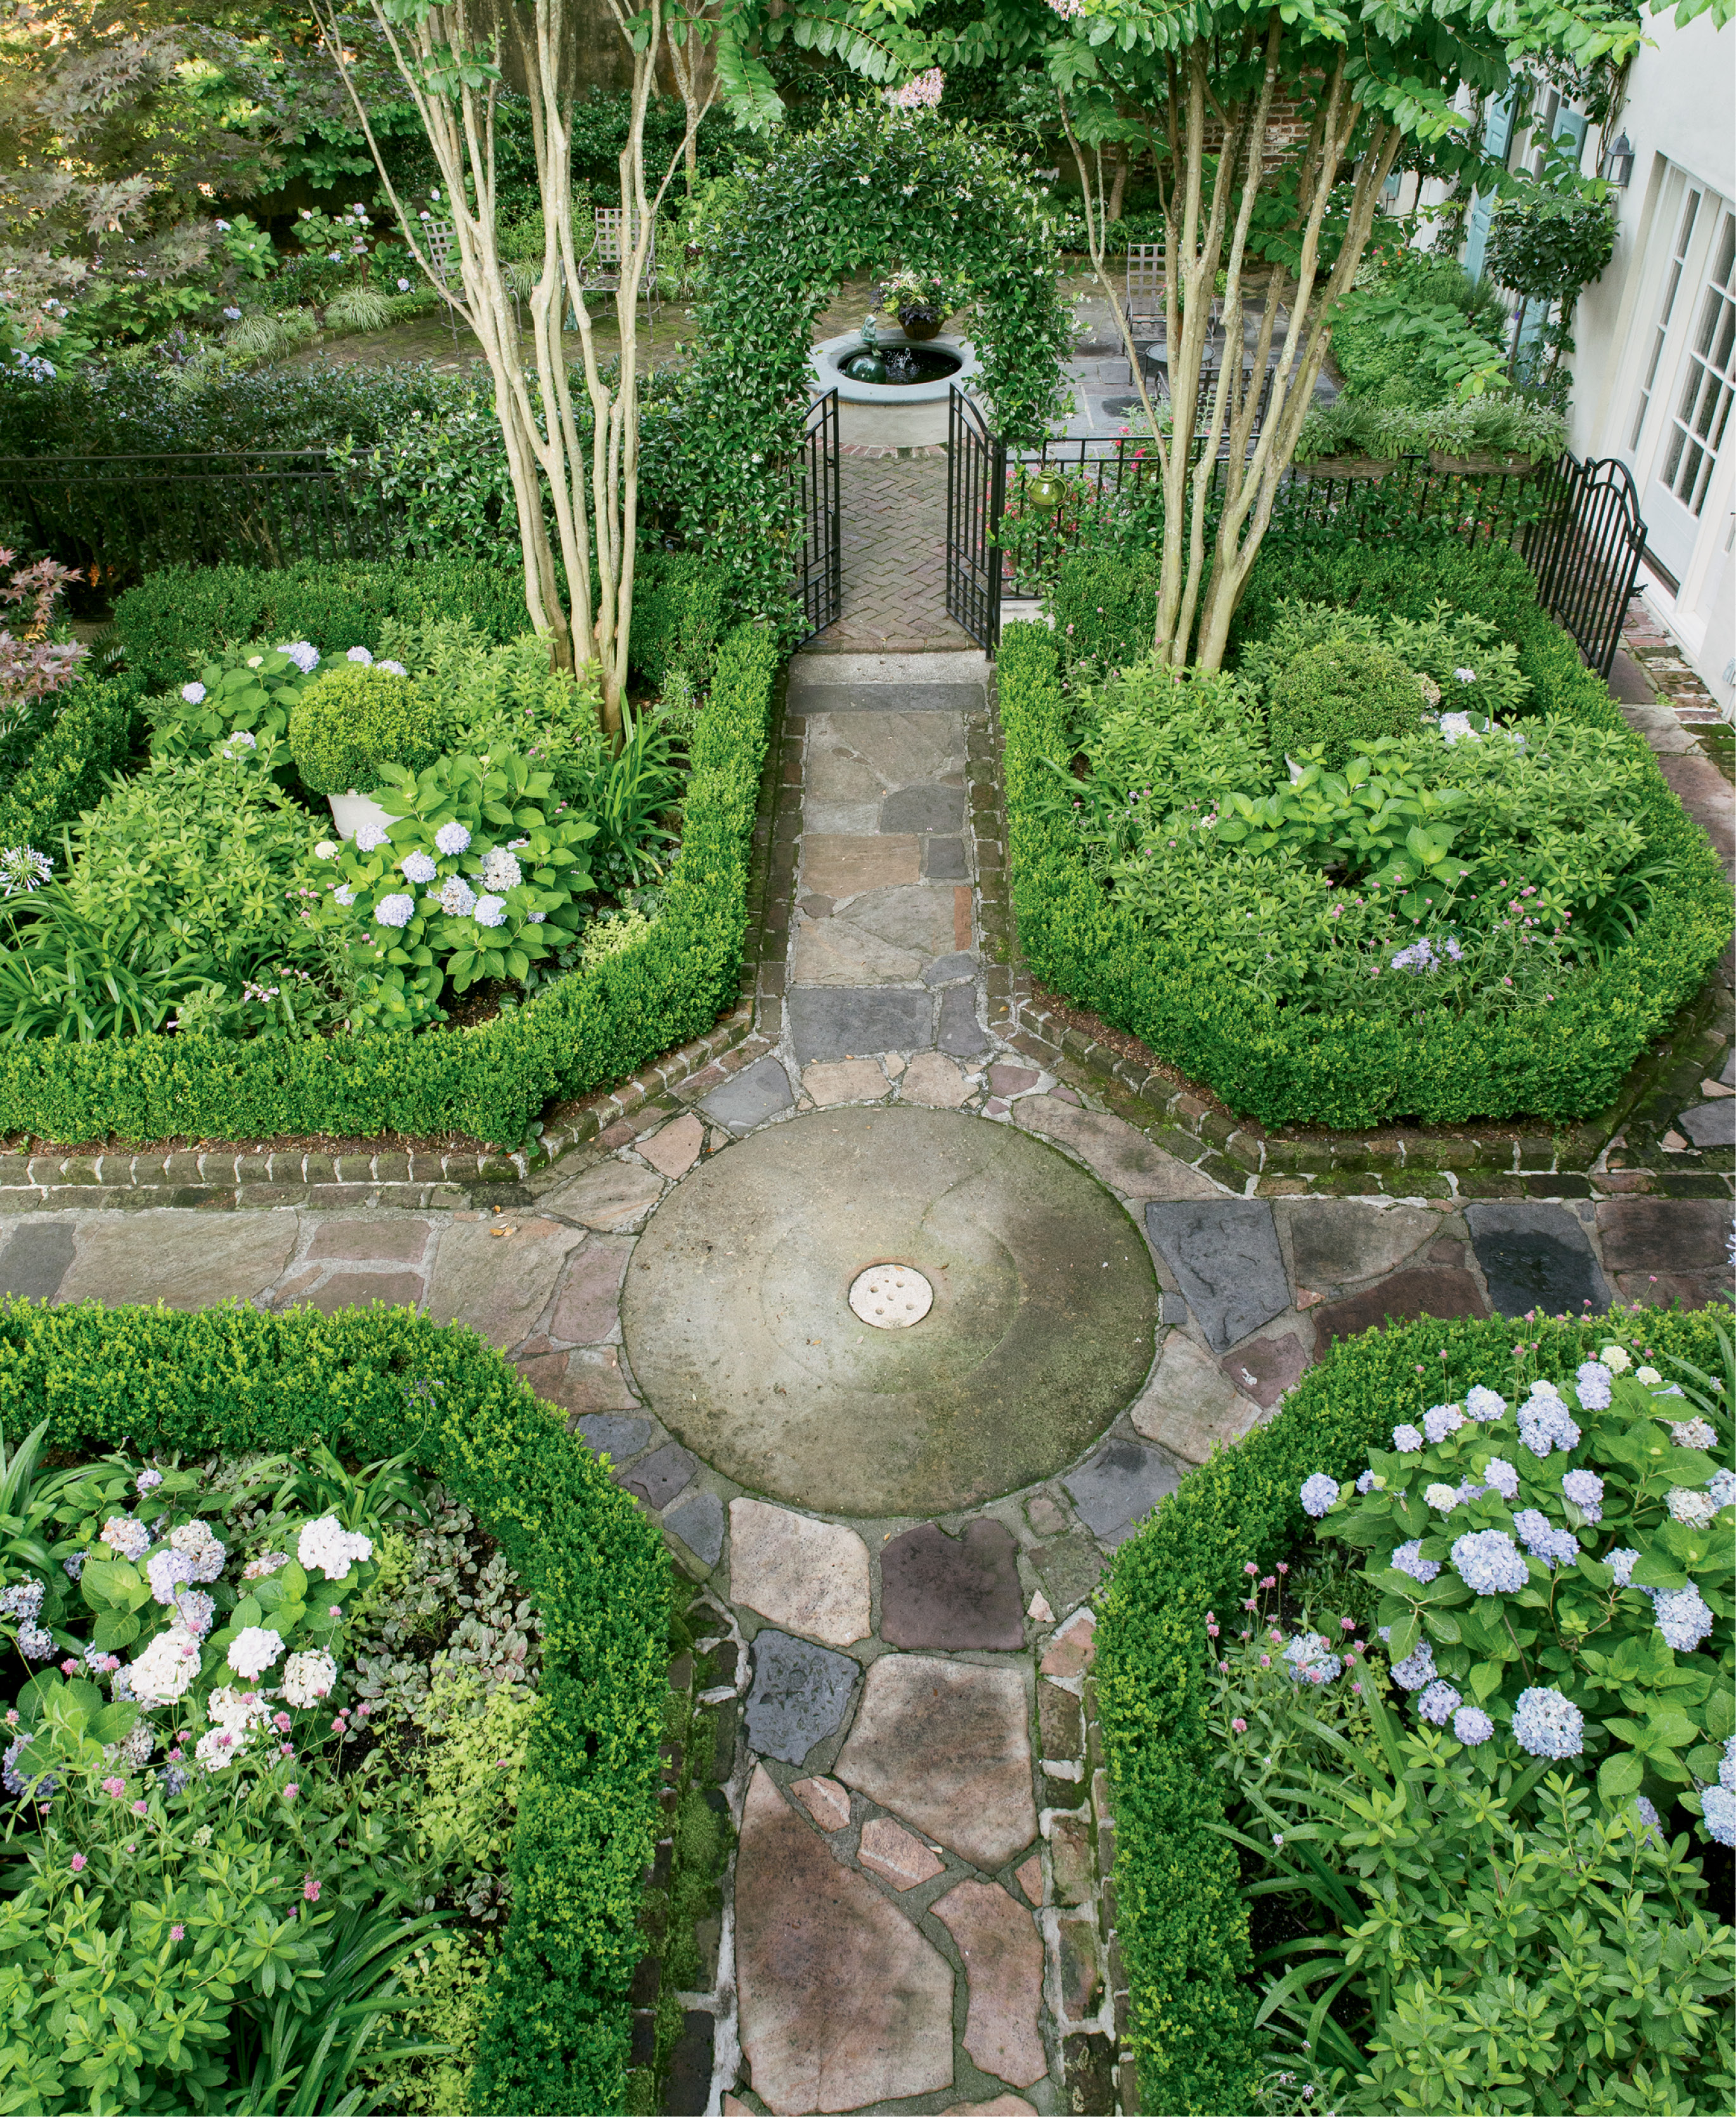 Its green spaces were originally conceived by noted garden designer Loutrel Briggs in 1951 and 1961. While Briggs’s initial vision of a French parterre garden and adjacent horseshoe-shaped courtyard remains intact, Monica and landscape architect Sheila Wertimer refreshed the space in 2010, removing overgrown vegetation and swapping in more flowering plants, such as azaleas, agapanthus, and hydrangeas.